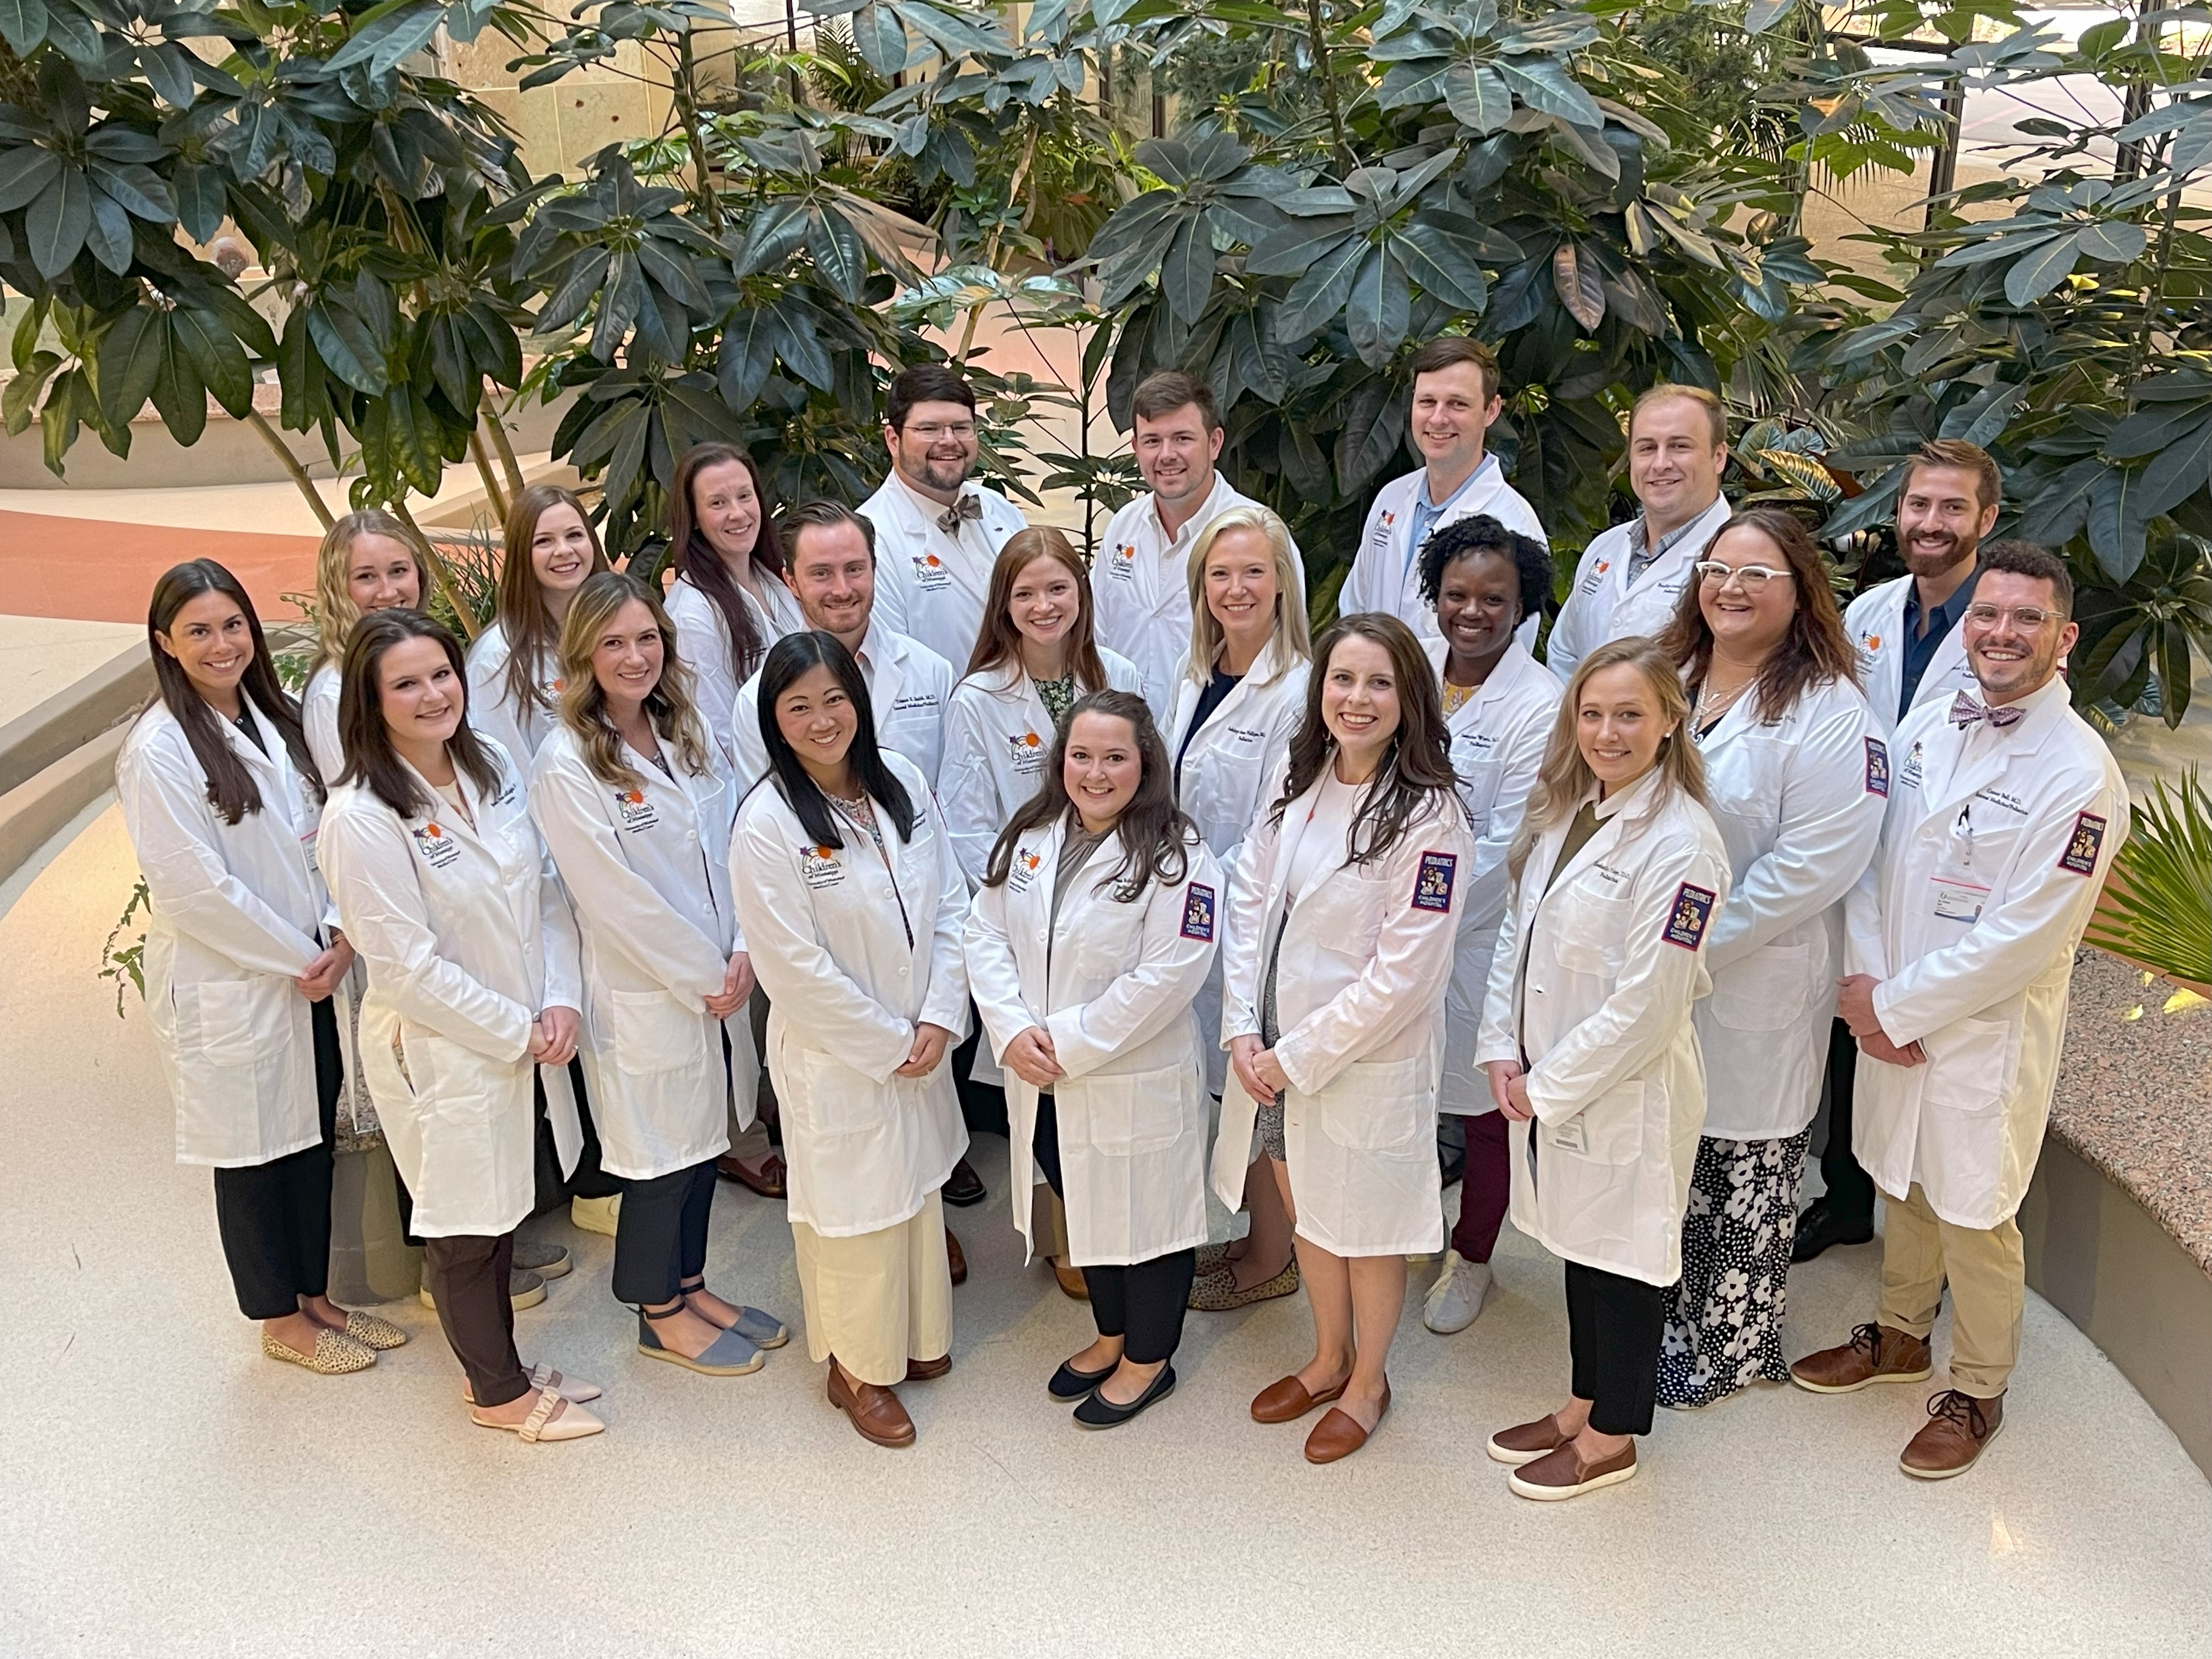 From left are, front row, McKenzie Ostrander, DO, Emilee Ann Bolden, MD, Grayson Maynard, DO, Stefanie Soy, DO; second row, Brooke McKnight, MD, Danielle Bryant, DO, Triston Smith, MD, Gracie Hoggard, MD, Ashley Gnam Phillips, MD, Jasmine Ware, MD, Taylor Mayes, DO, Conner Ball, MD; and third row, Olivia Grant, MD, Avery Villeret, MD, Taylor Welch, MD, Nicole Pike, MBChB, Ben Thompson, MD, Brandon Bergeron, MD, Banks Carlisle, MD, Bradley Louis, DO, Spencer Hilgenfeldt, MD.